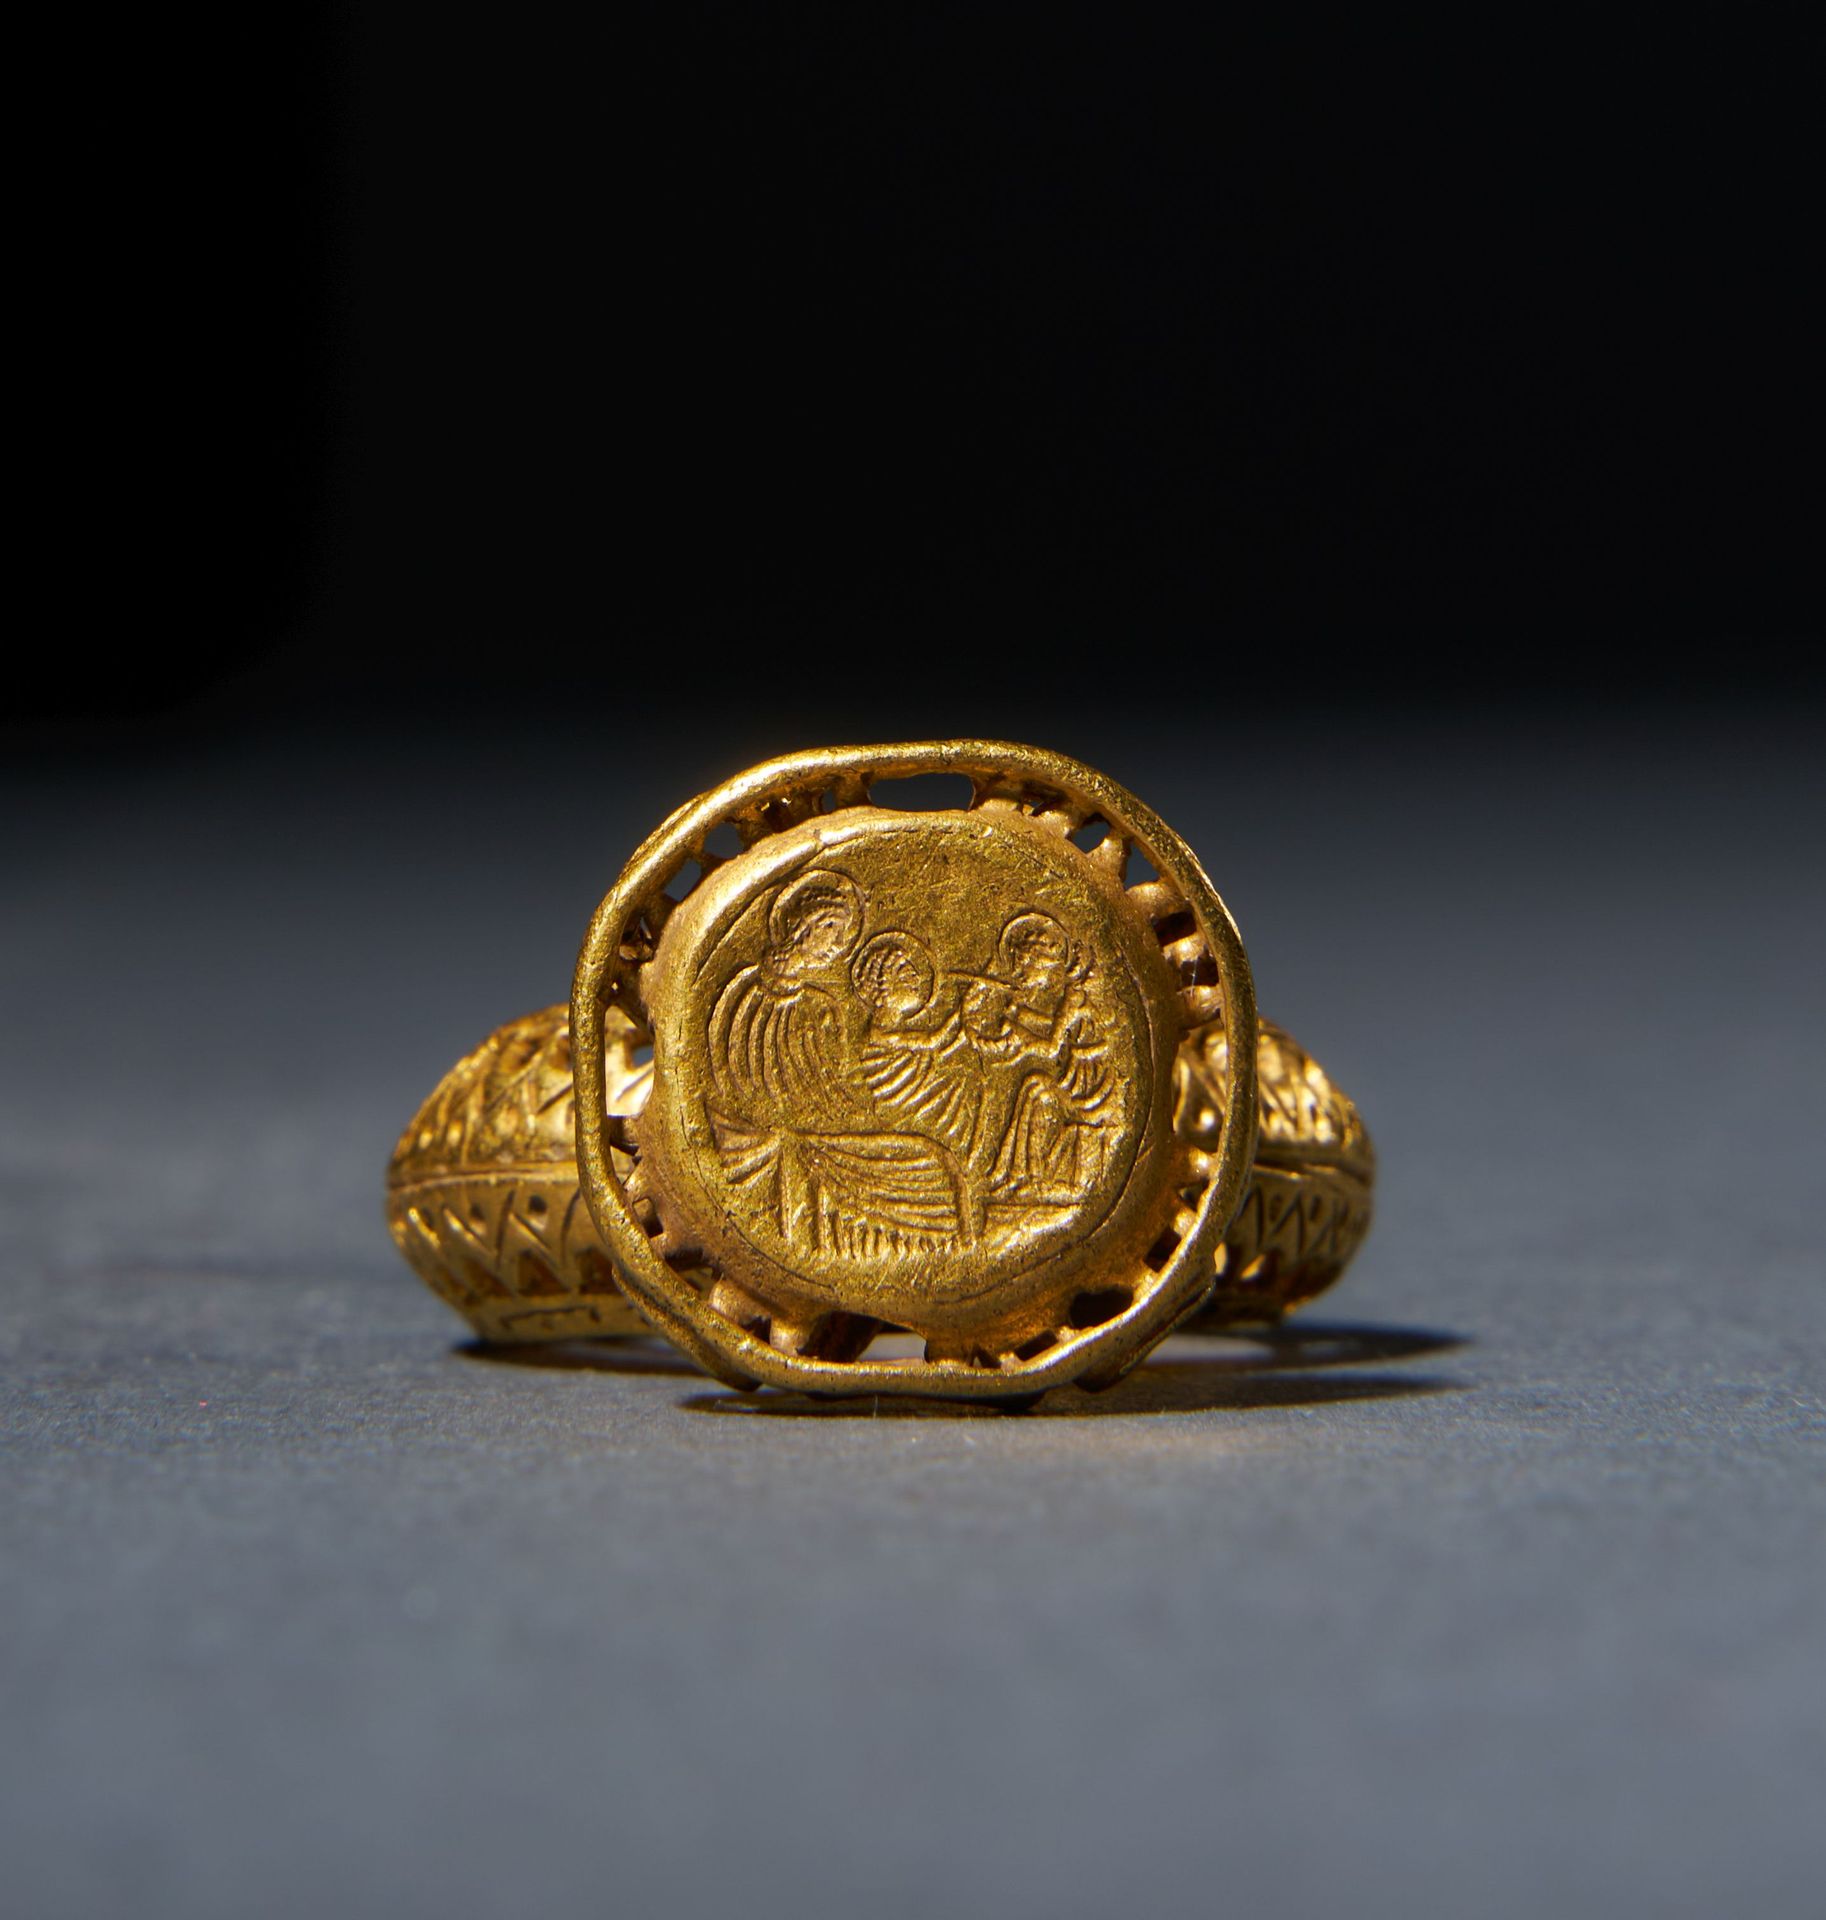 A GOLD BYZANTINE RING DEPICTING THE NAVITIY SCENE OF THE BIRTH OF CHRIST, CIRCA &hellip;